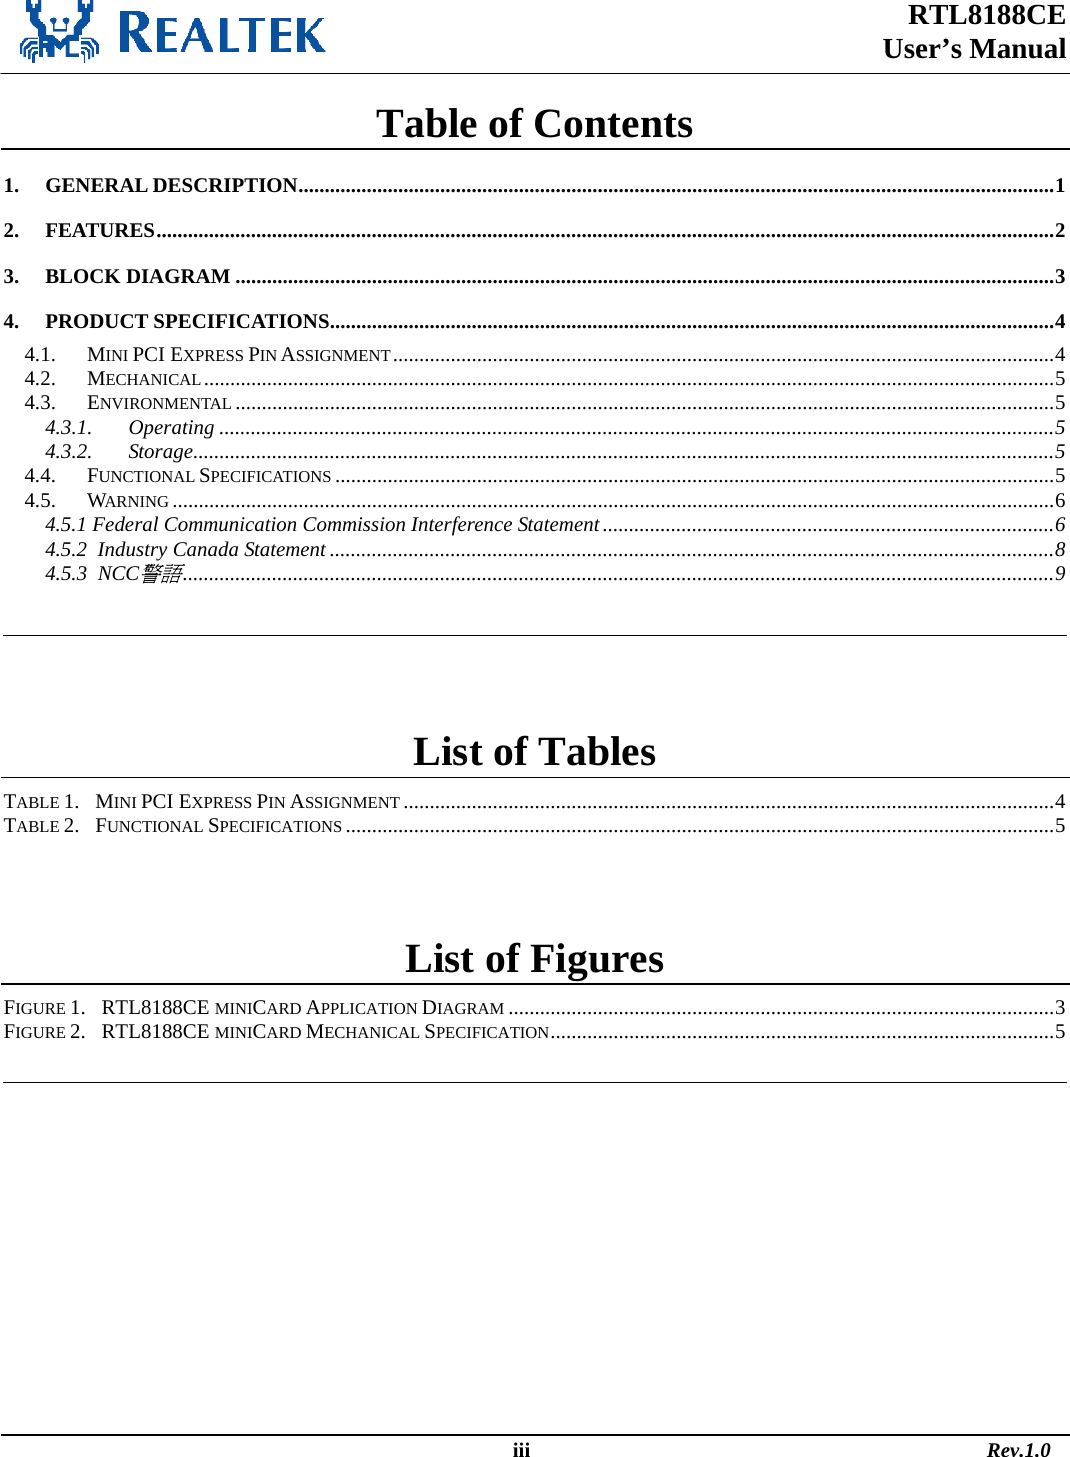 RTL8188CE  User’s Manual  Table of Contents 1. GENERAL DESCRIPTION................................................................................................................................................1 2. FEATURES...........................................................................................................................................................................2 3. BLOCK DIAGRAM ............................................................................................................................................................3 4. PRODUCT SPECIFICATIONS..........................................................................................................................................4 4.1. MINI PCI EXPRESS PIN ASSIGNMENT..............................................................................................................................4 4.2. MECHANICAL..................................................................................................................................................................5 4.3. ENVIRONMENTAL ............................................................................................................................................................5 4.3.1. Operating ...............................................................................................................................................................5 4.3.2. Storage....................................................................................................................................................................5 4.4. FUNCTIONAL SPECIFICATIONS .........................................................................................................................................5 4.5. WARNING ........................................................................................................................................................................6 4.5.1 Federal Communication Commission Interference Statement......................................................................................6 4.5.2  Industry Canada Statement ..........................................................................................................................................8 4.5.3  NCC警語......................................................................................................................................................................9    List of Tables TABLE 1.   MINI PCI EXPRESS PIN ASSIGNMENT ............................................................................................................................4 TABLE 2.   FUNCTIONAL SPECIFICATIONS .......................................................................................................................................5  List of Figures FIGURE 1.   RTL8188CE MINICARD APPLICATION DIAGRAM ........................................................................................................3 FIGURE 2.   RTL8188CE MINICARD MECHANICAL SPECIFICATION................................................................................................5                                                                                                    iii                                                                                       Rev.1.0 